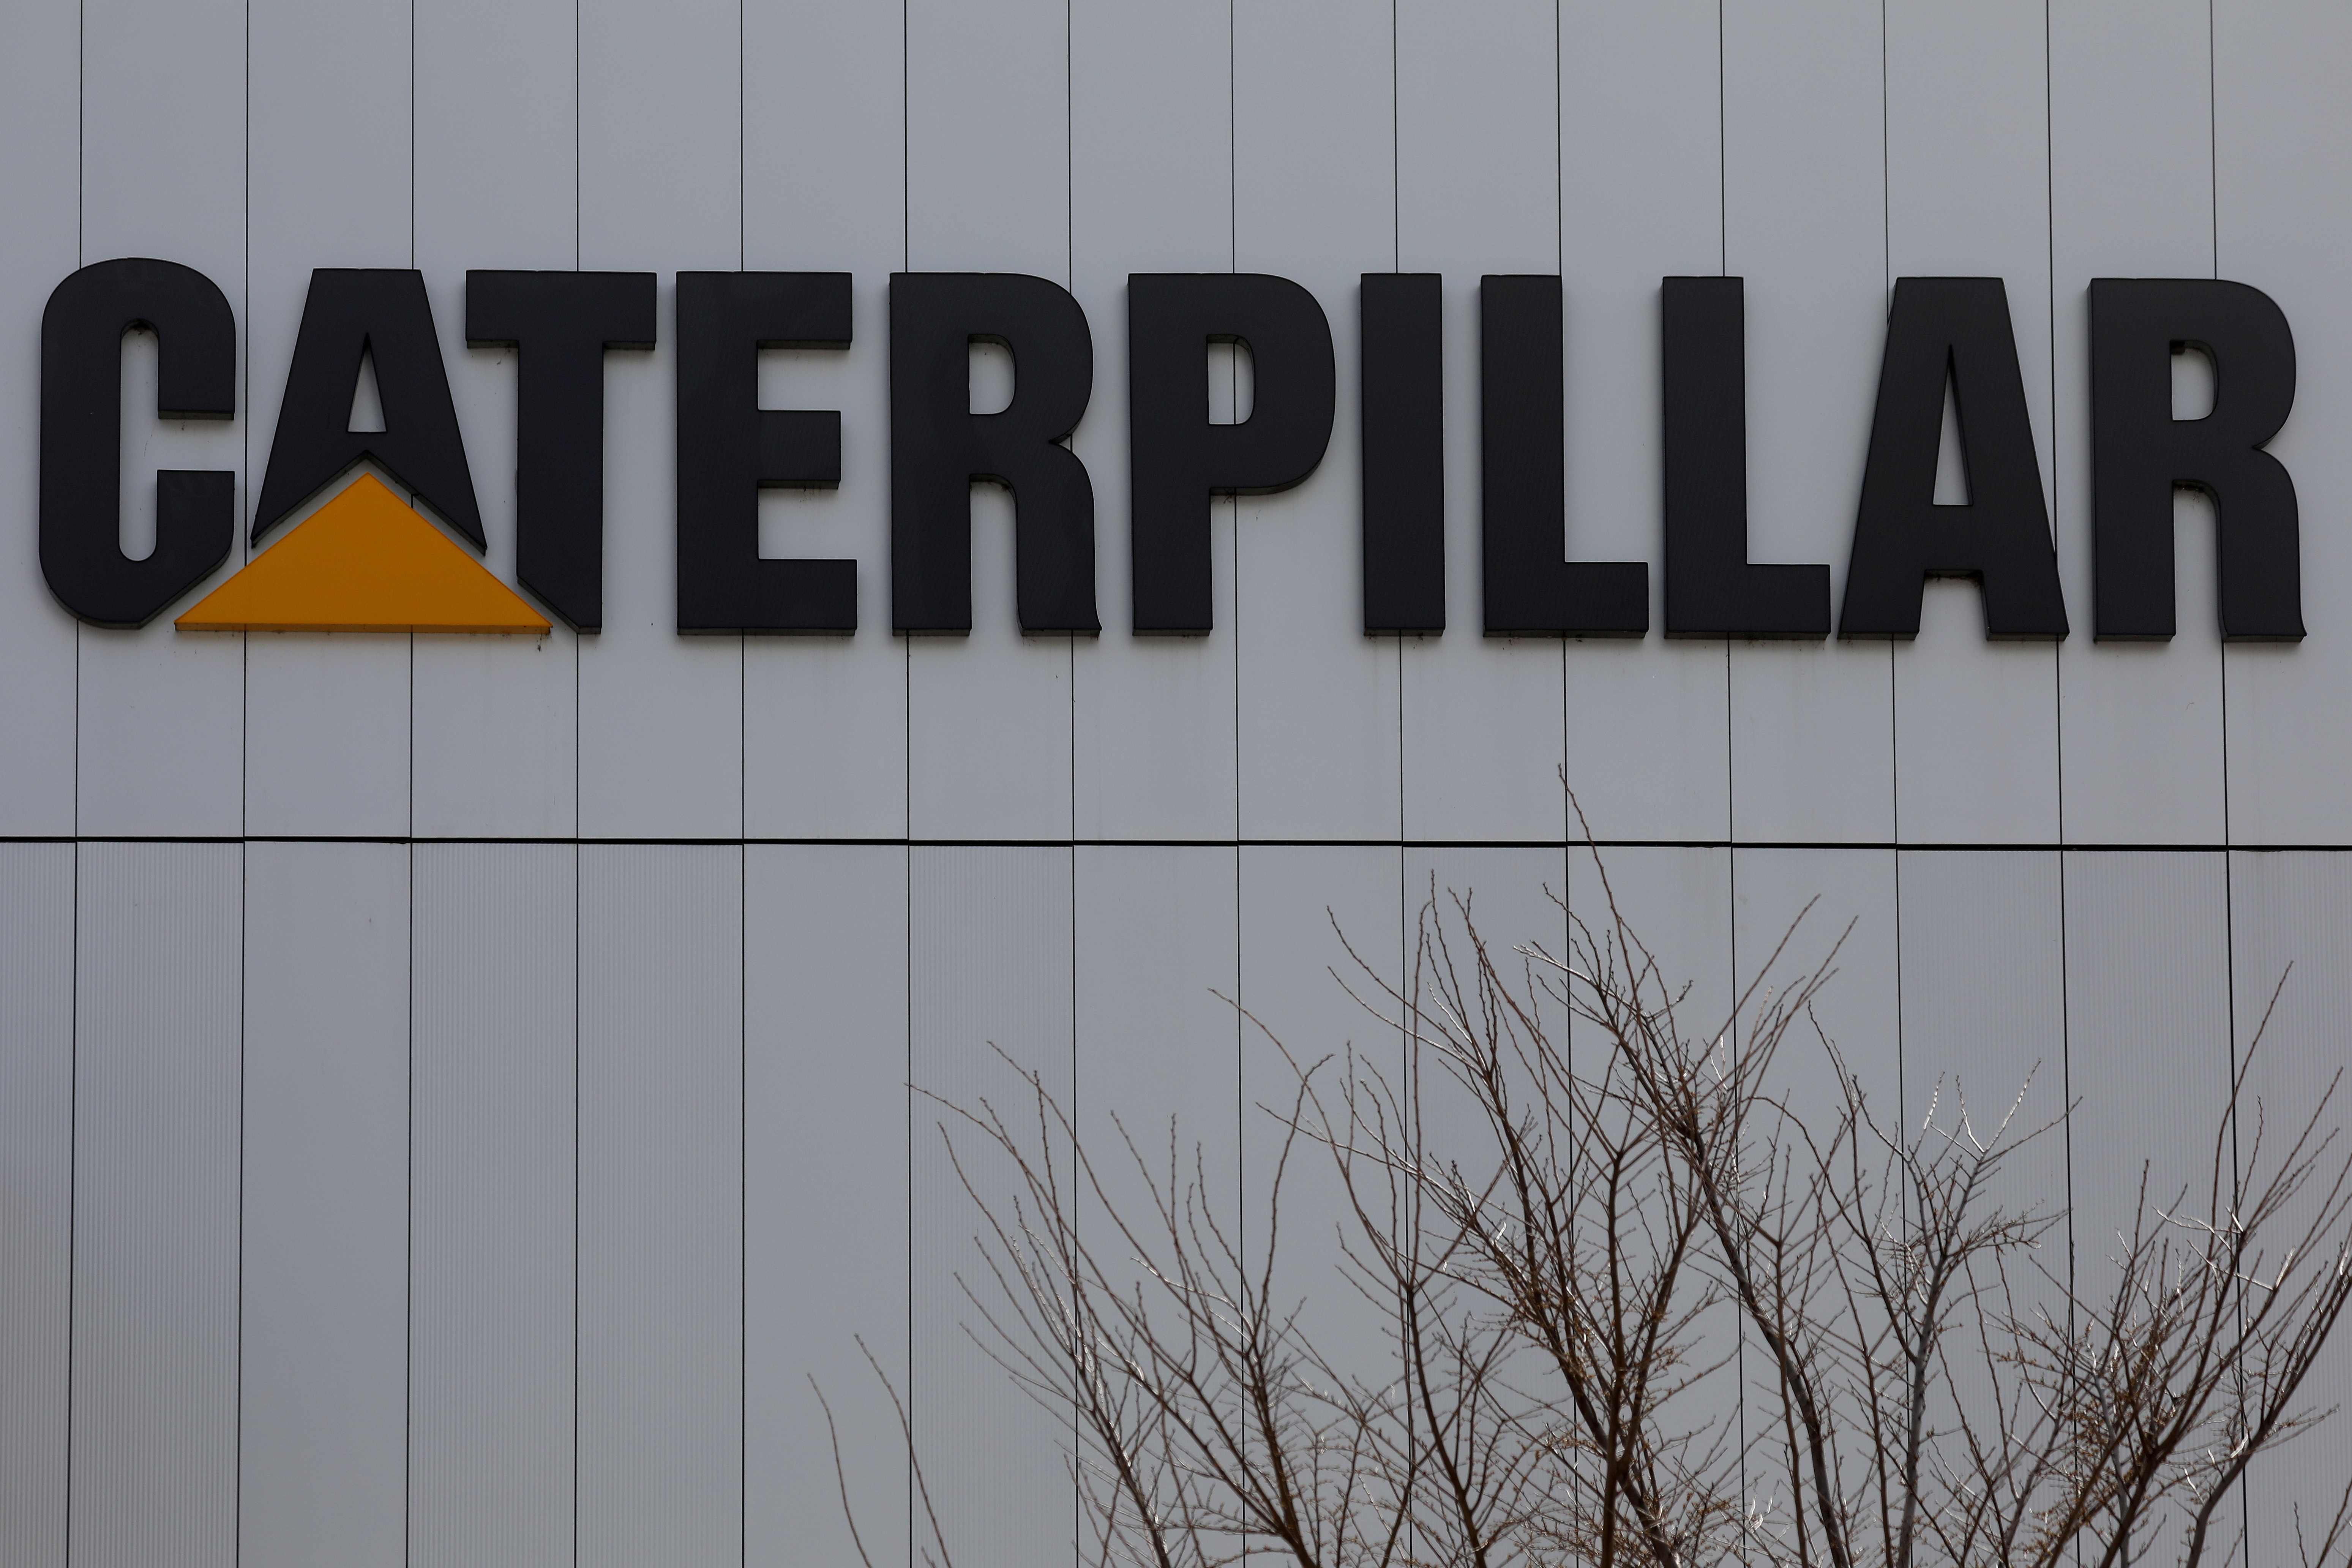 A Caterpillar corporate logo is pictured on a building in Peoria